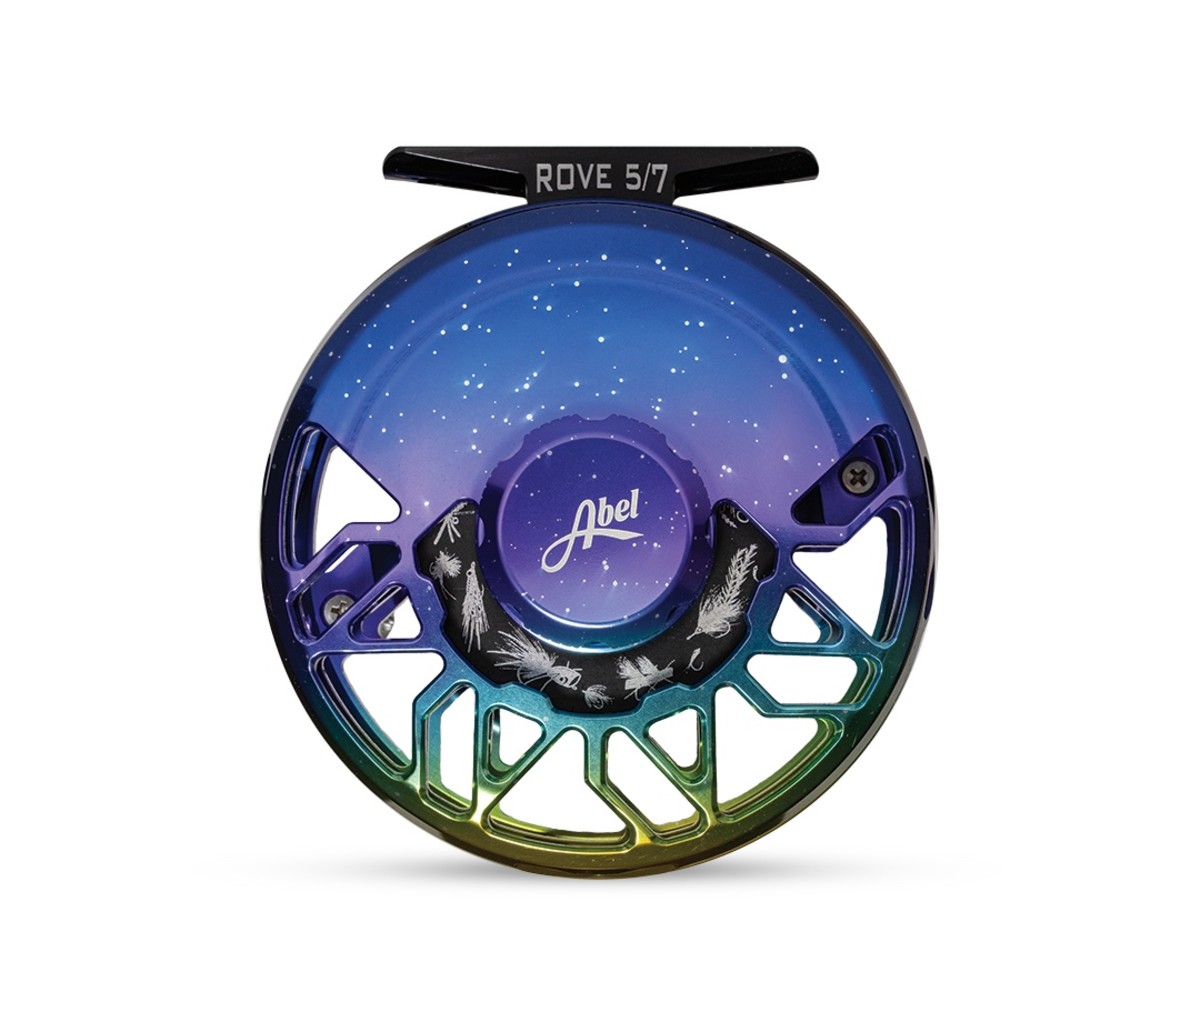 Add the Abel Rove reel to your next saltwater fly-fishing trip.